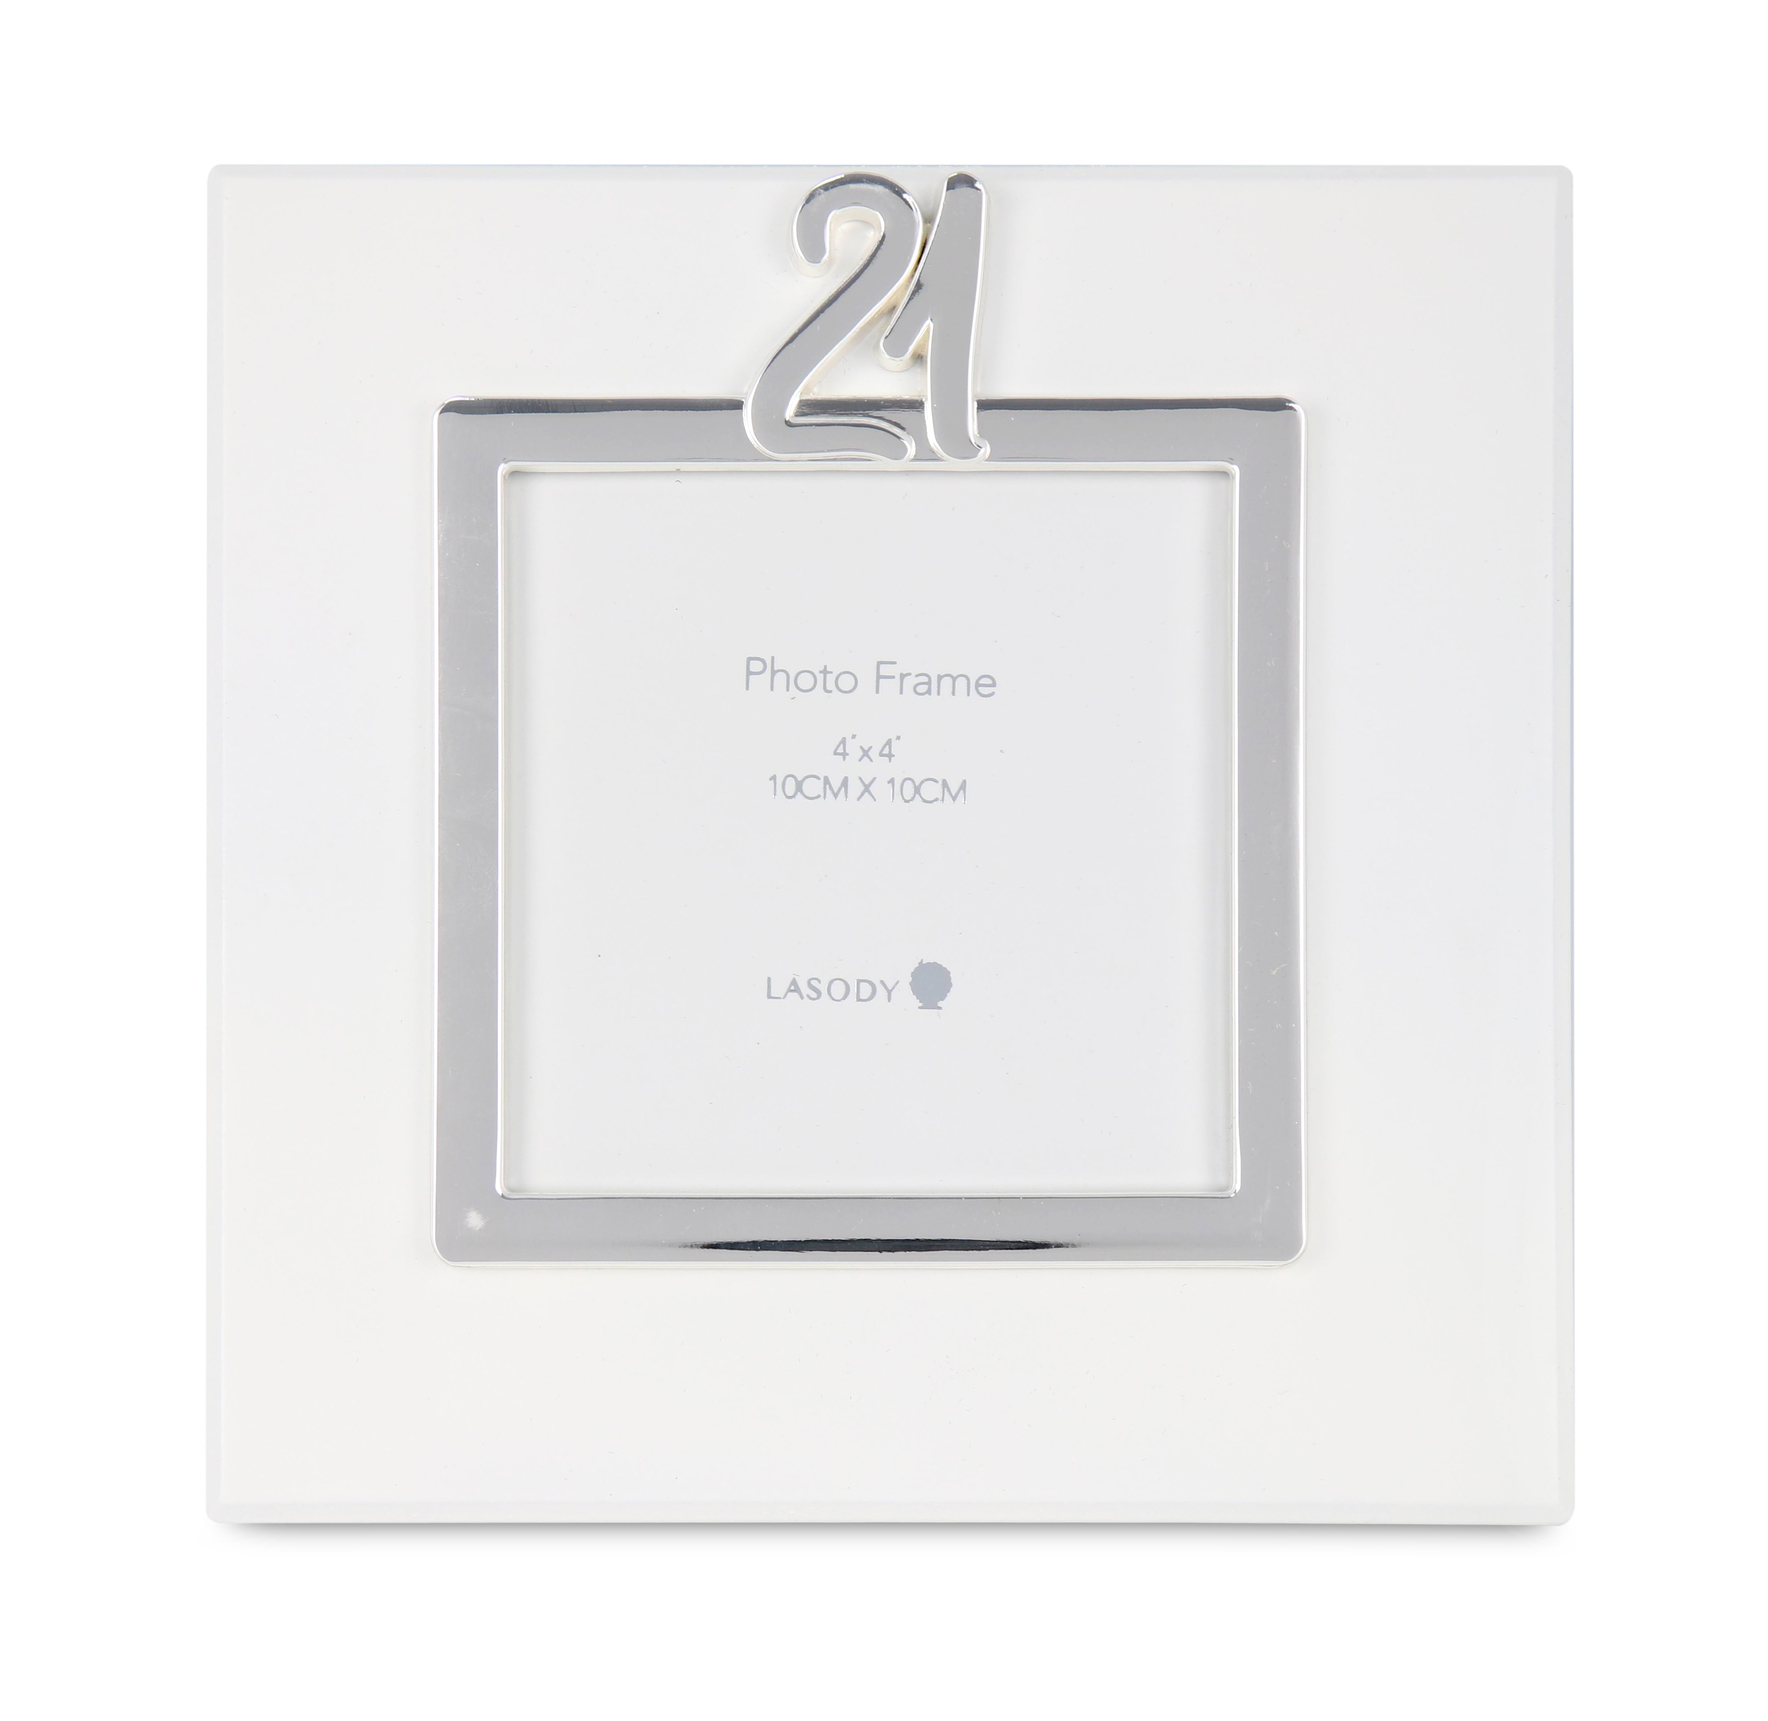 The number 21 wooden frame picture frame